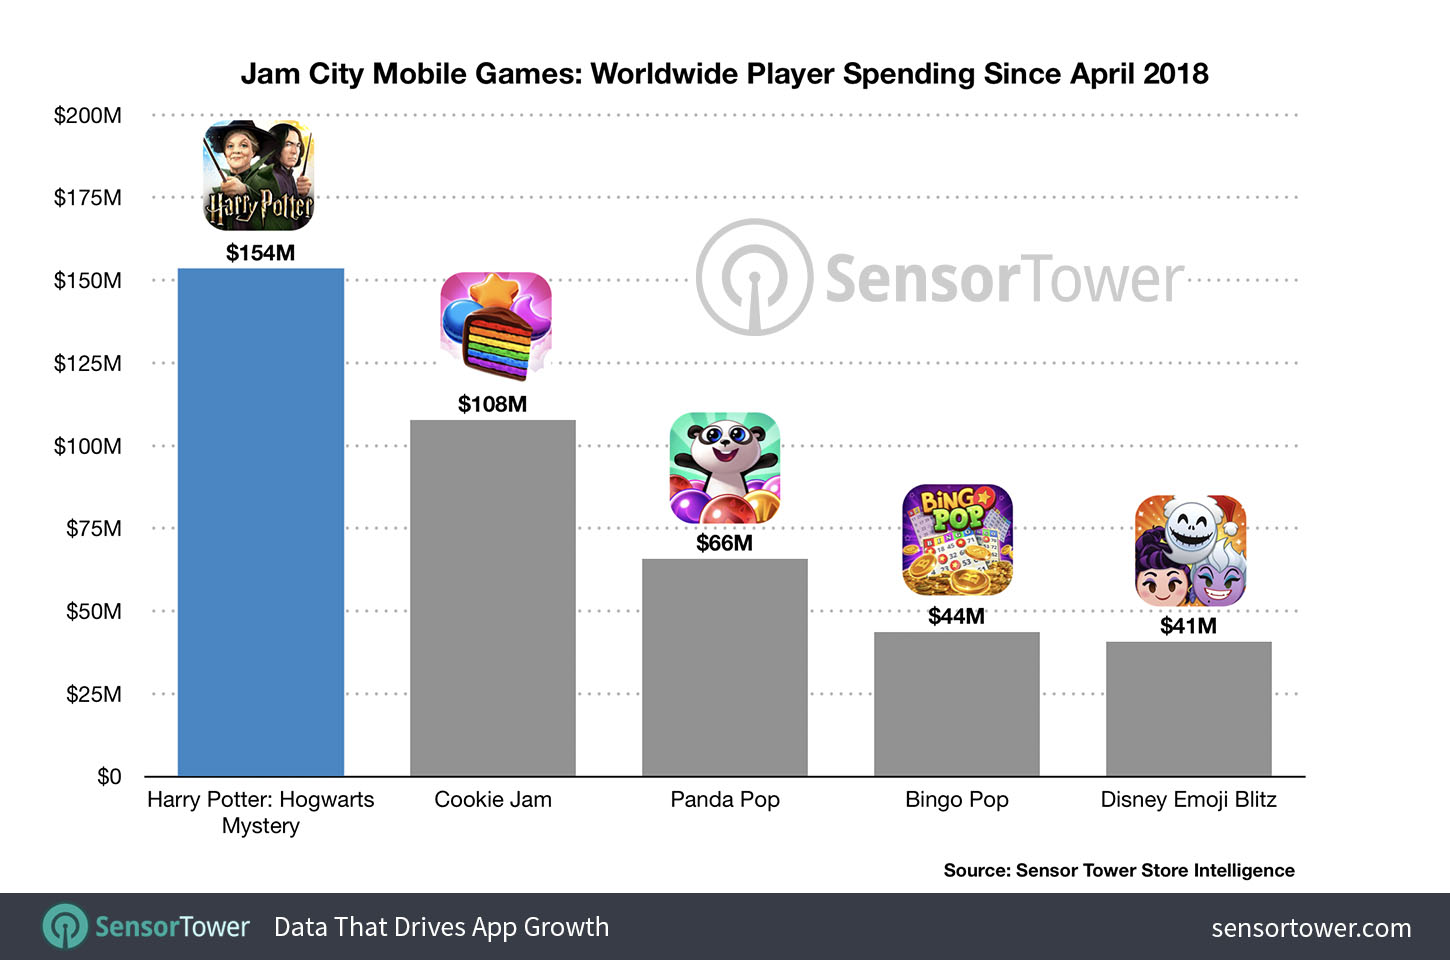 Harry Potter: Hogwarts Mystery lifetime revenue compared to Jam City's other mobile games since 2018